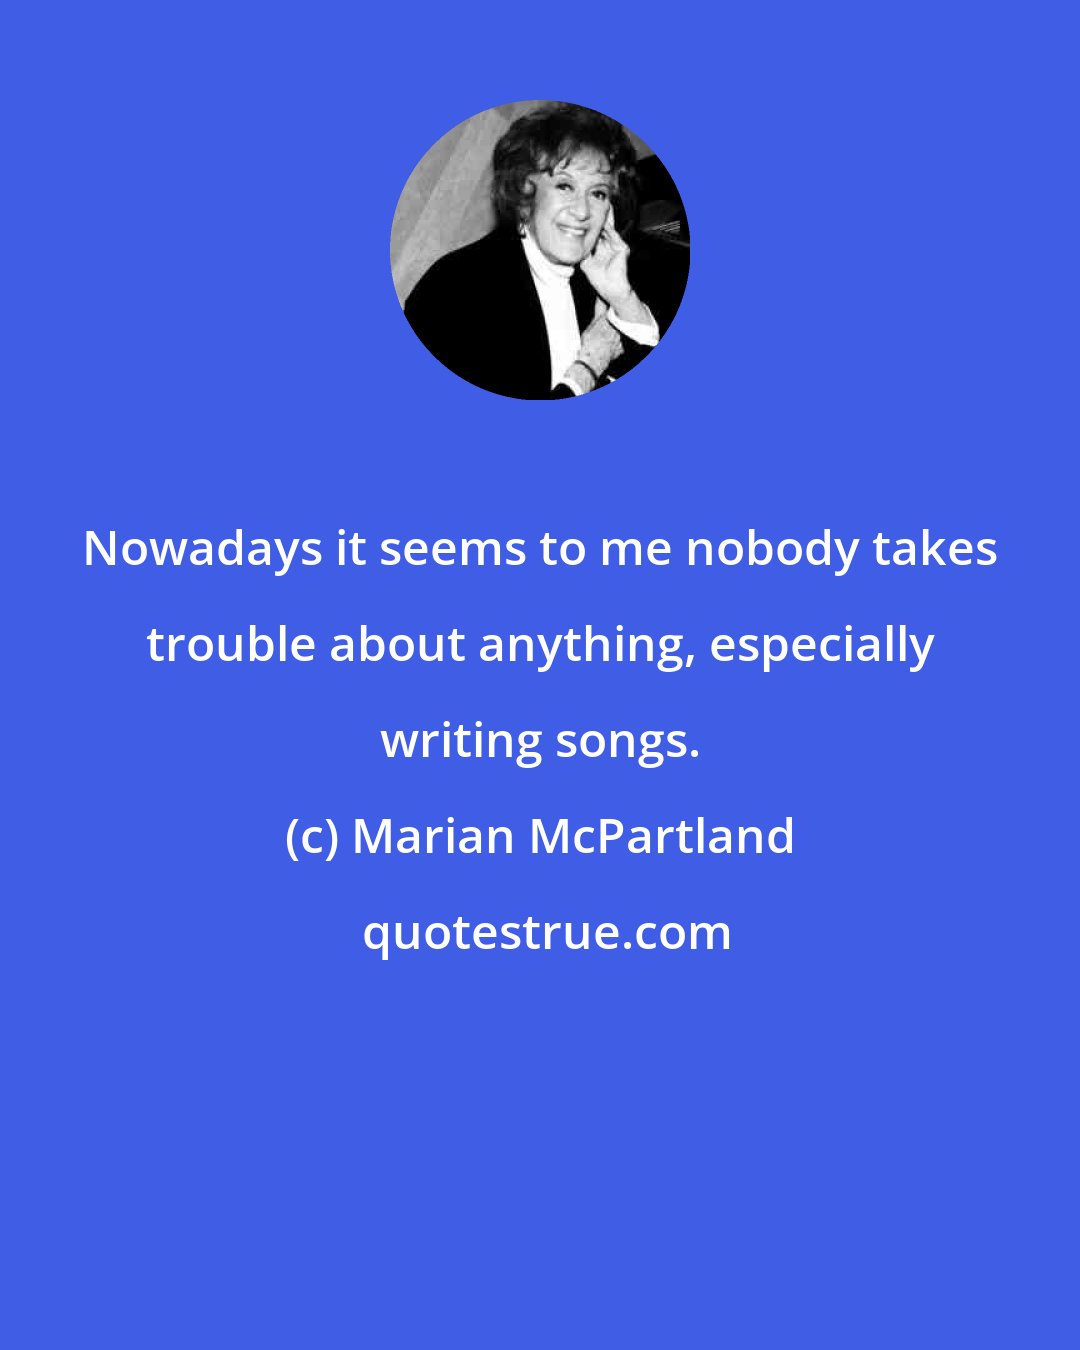 Marian McPartland: Nowadays it seems to me nobody takes trouble about anything, especially writing songs.